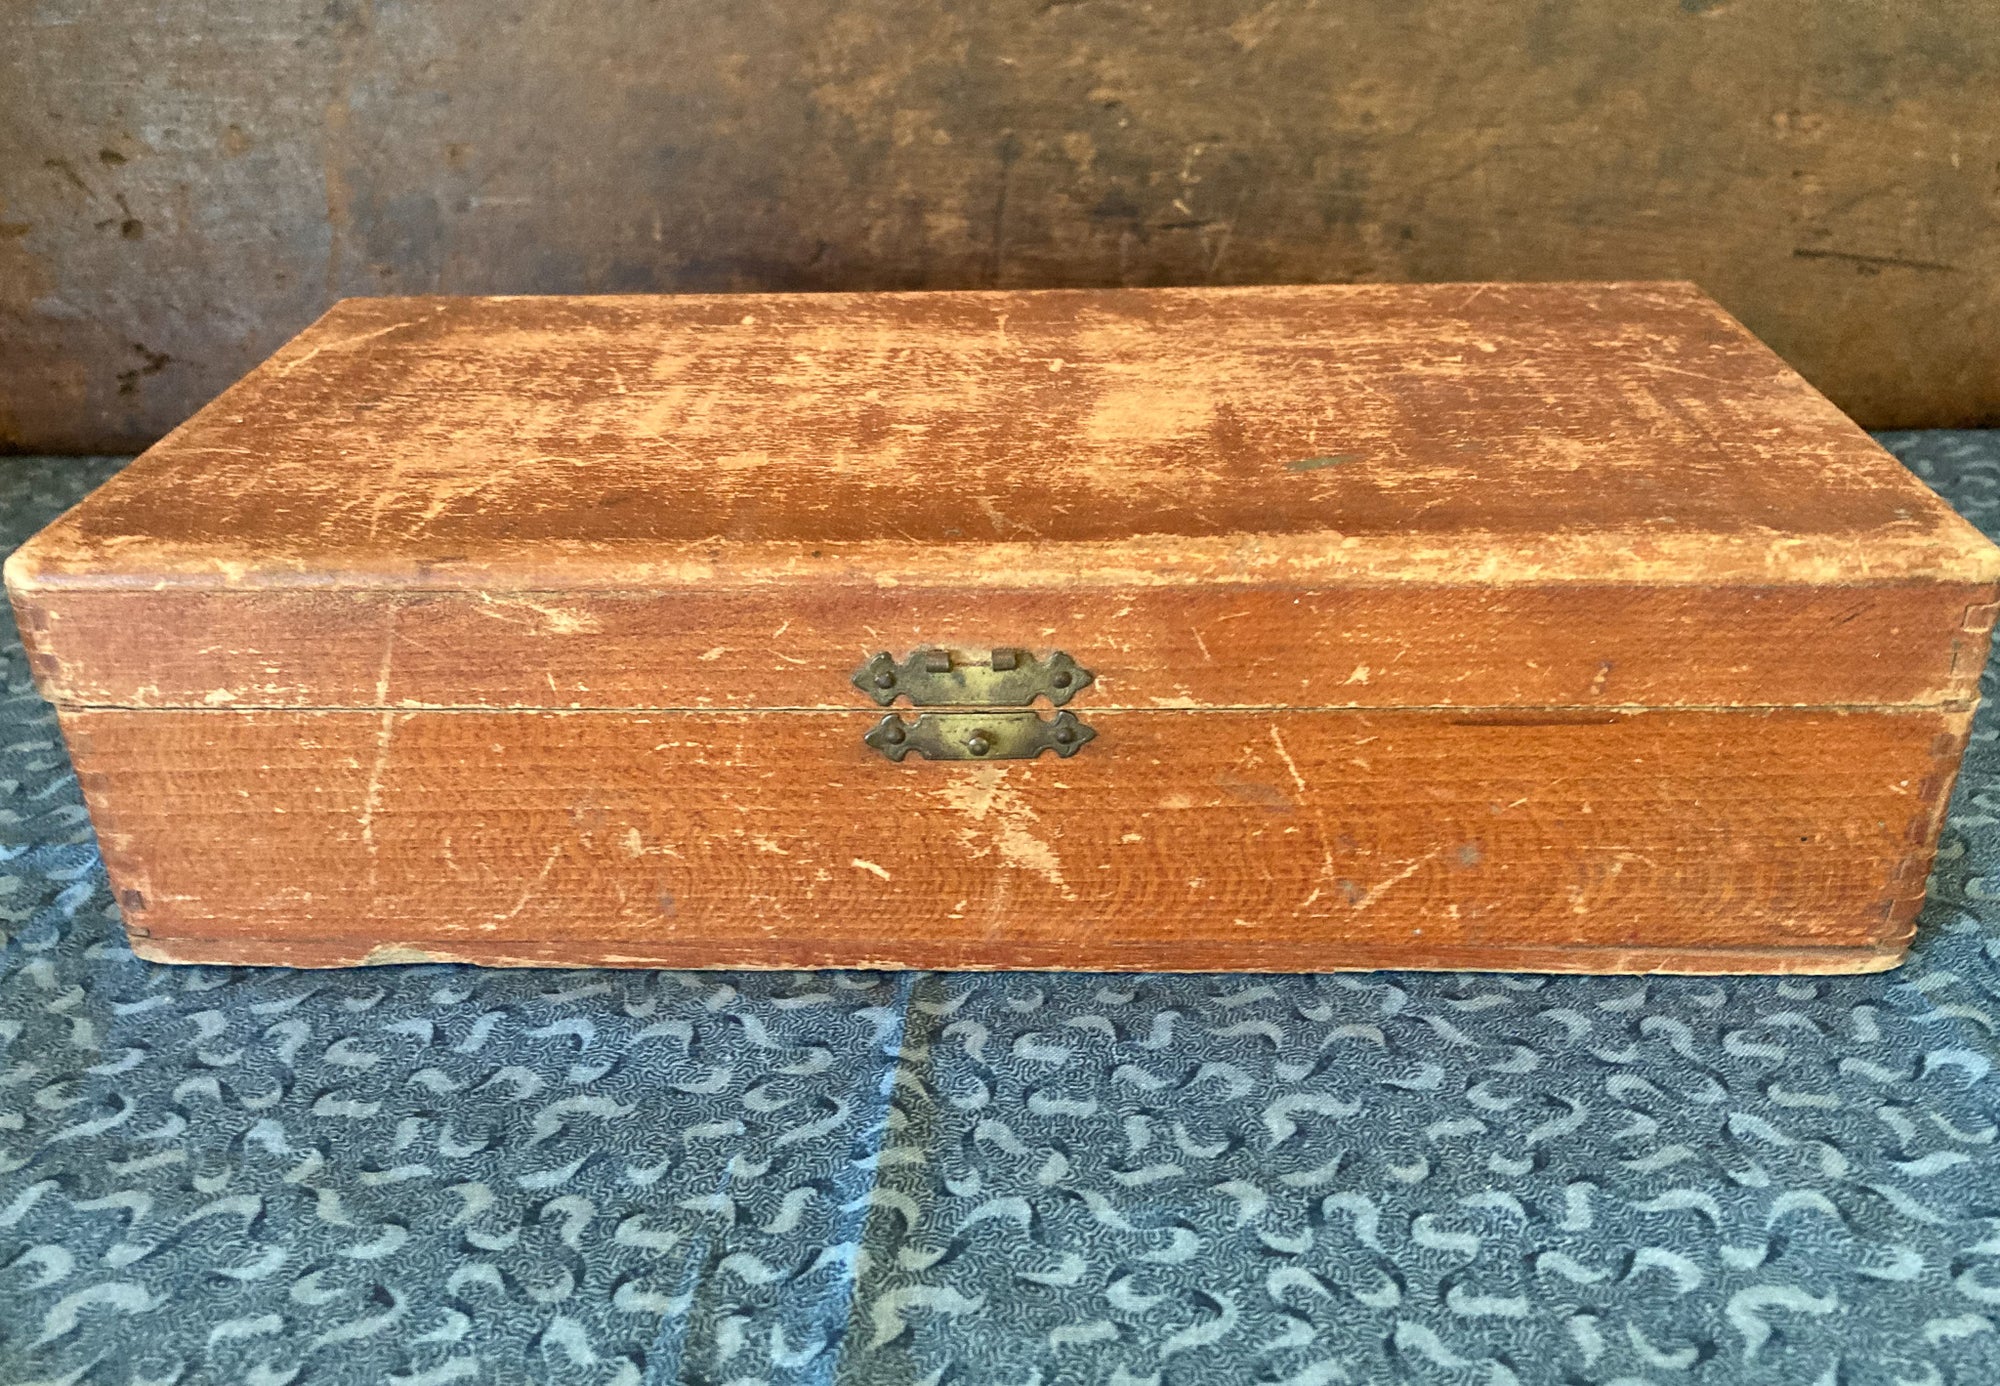 Late 1800’s “Clinton Safety Pins” Box with Wooden Thread Spools